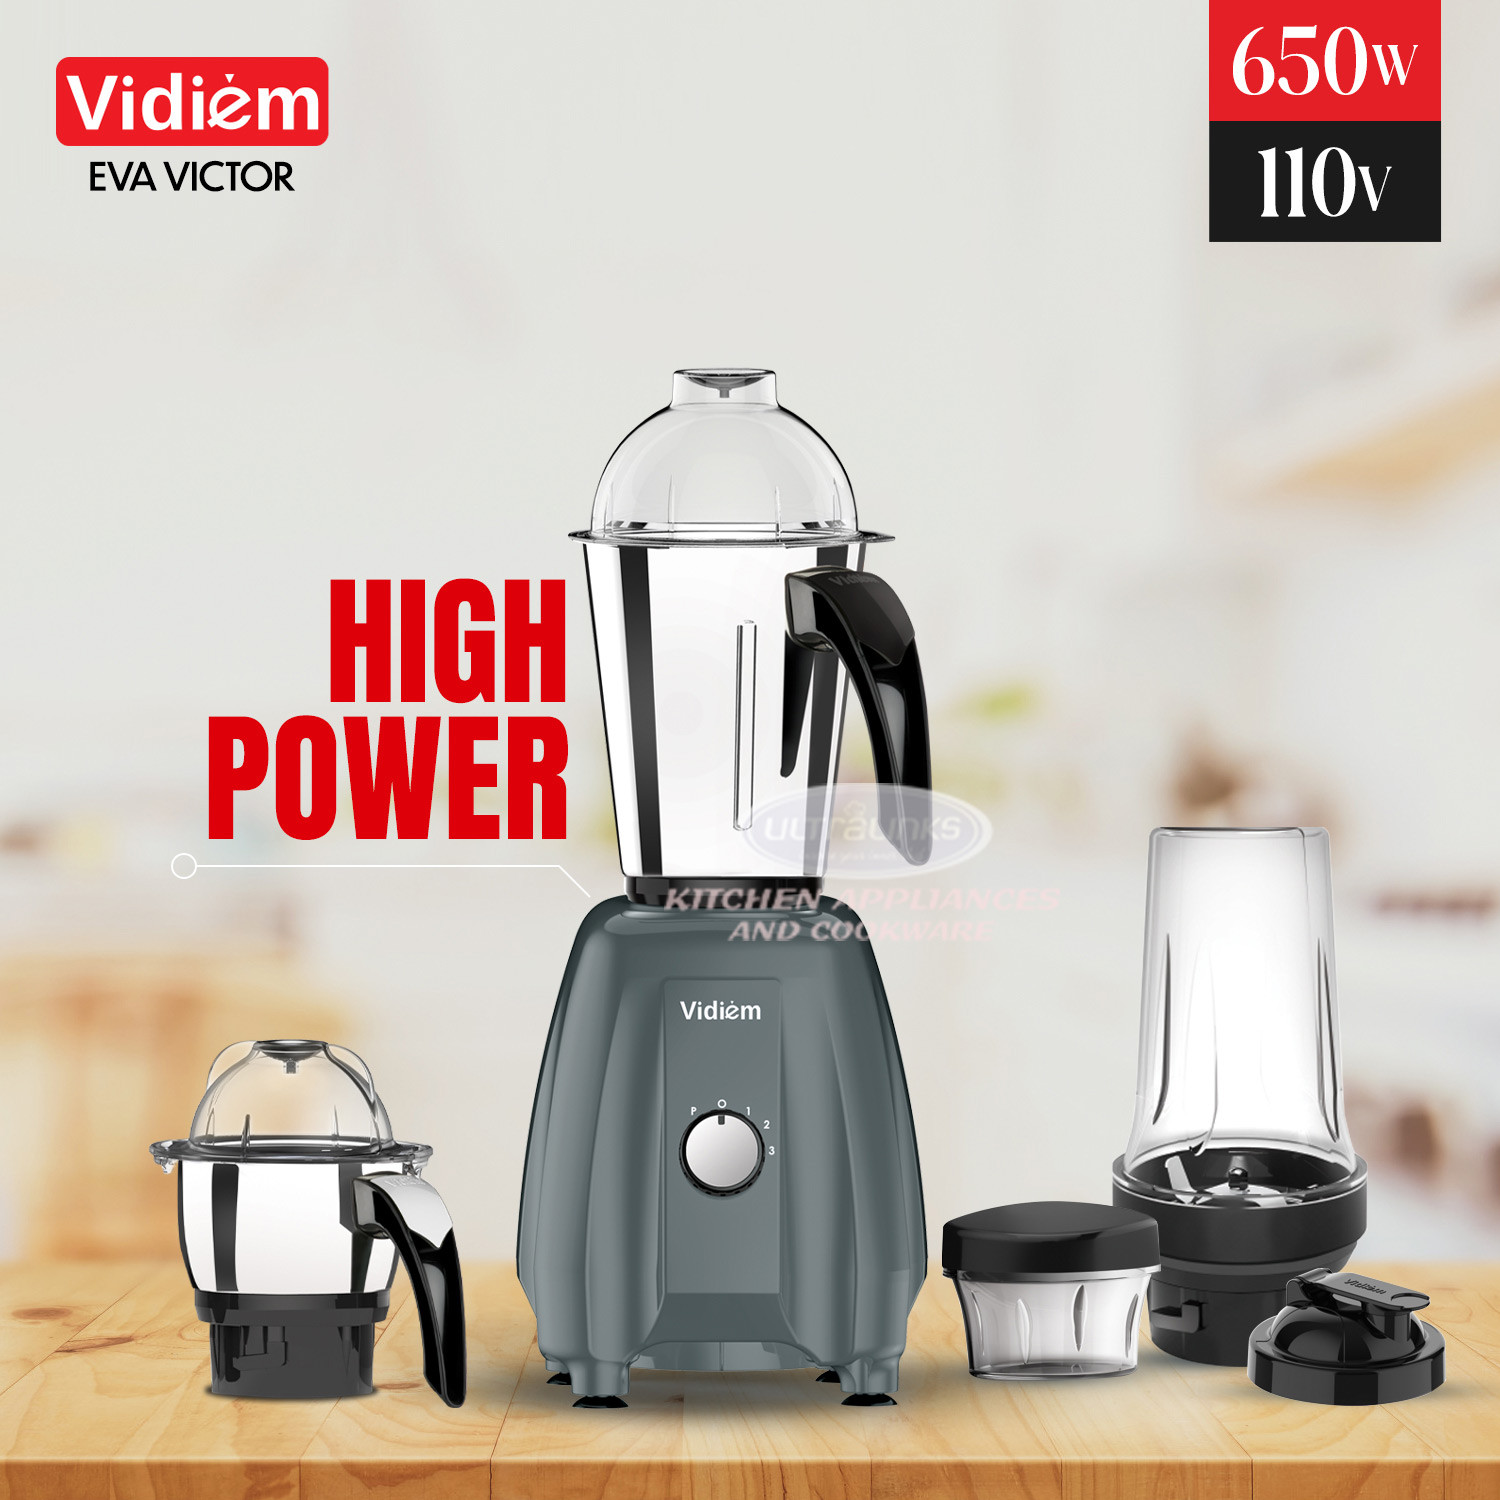 vidiem-eva-victor-pro-650w-110v-indian-mixer-grinder-ss-jars-250ml-spice-personal-coffee-herbs-grinder-with-500ml-personal-juices-shakes-smoothie-blender-made-for-canada-usa6